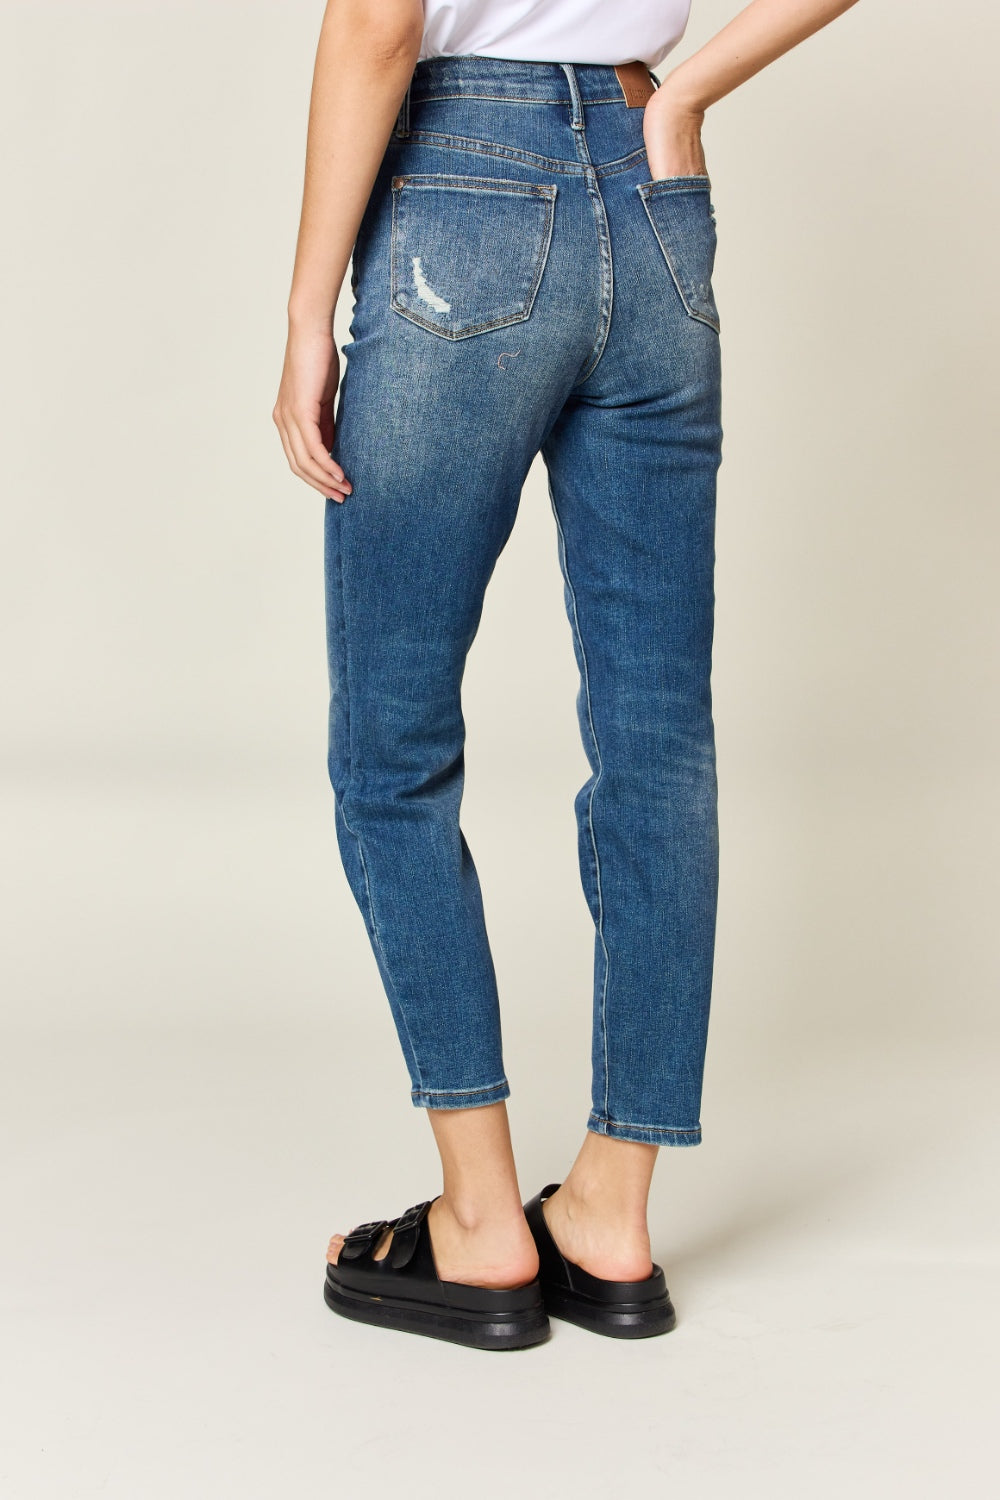 Judy Blue Full Size Tummy Control High Waist Slim Jeans-Denim-Inspired by Justeen-Women's Clothing Boutique in Chicago, Illinois